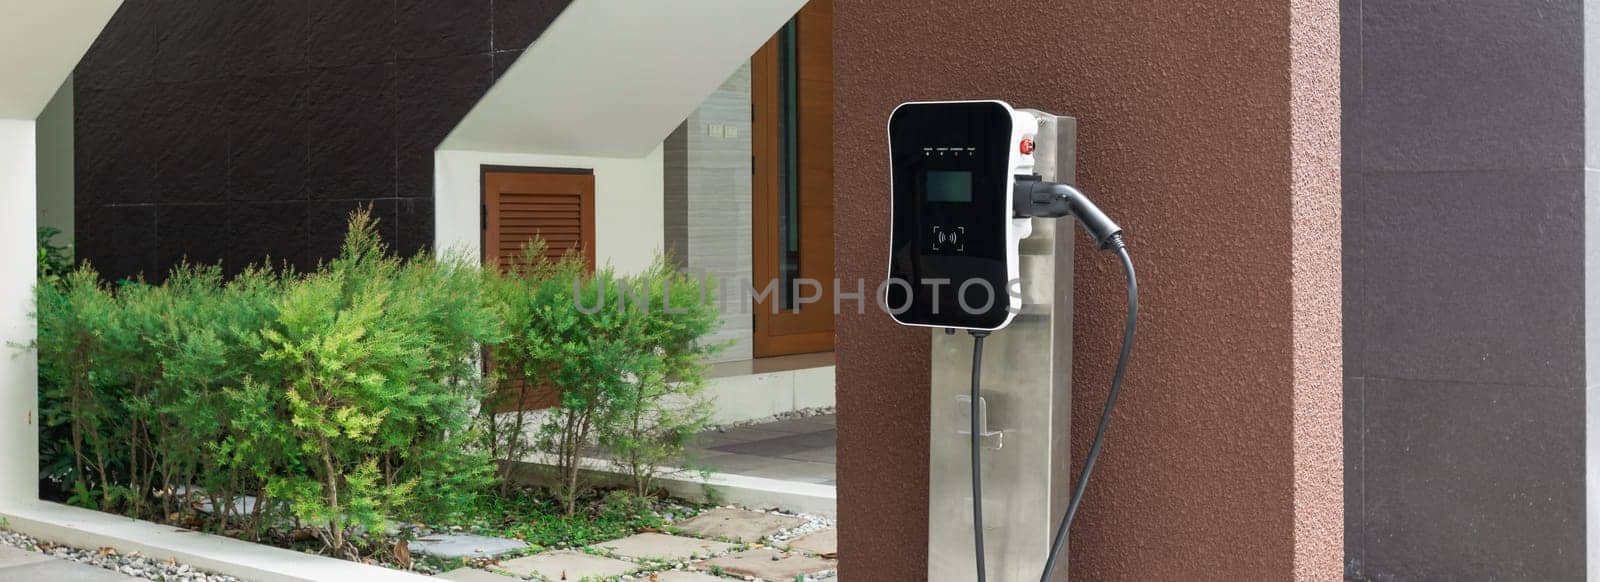 Progressive green energy-powered charging station concept for electric vehicle connected to home charging station at the garage or backyard. Eco friendly rechargeable car powered by clean energy.